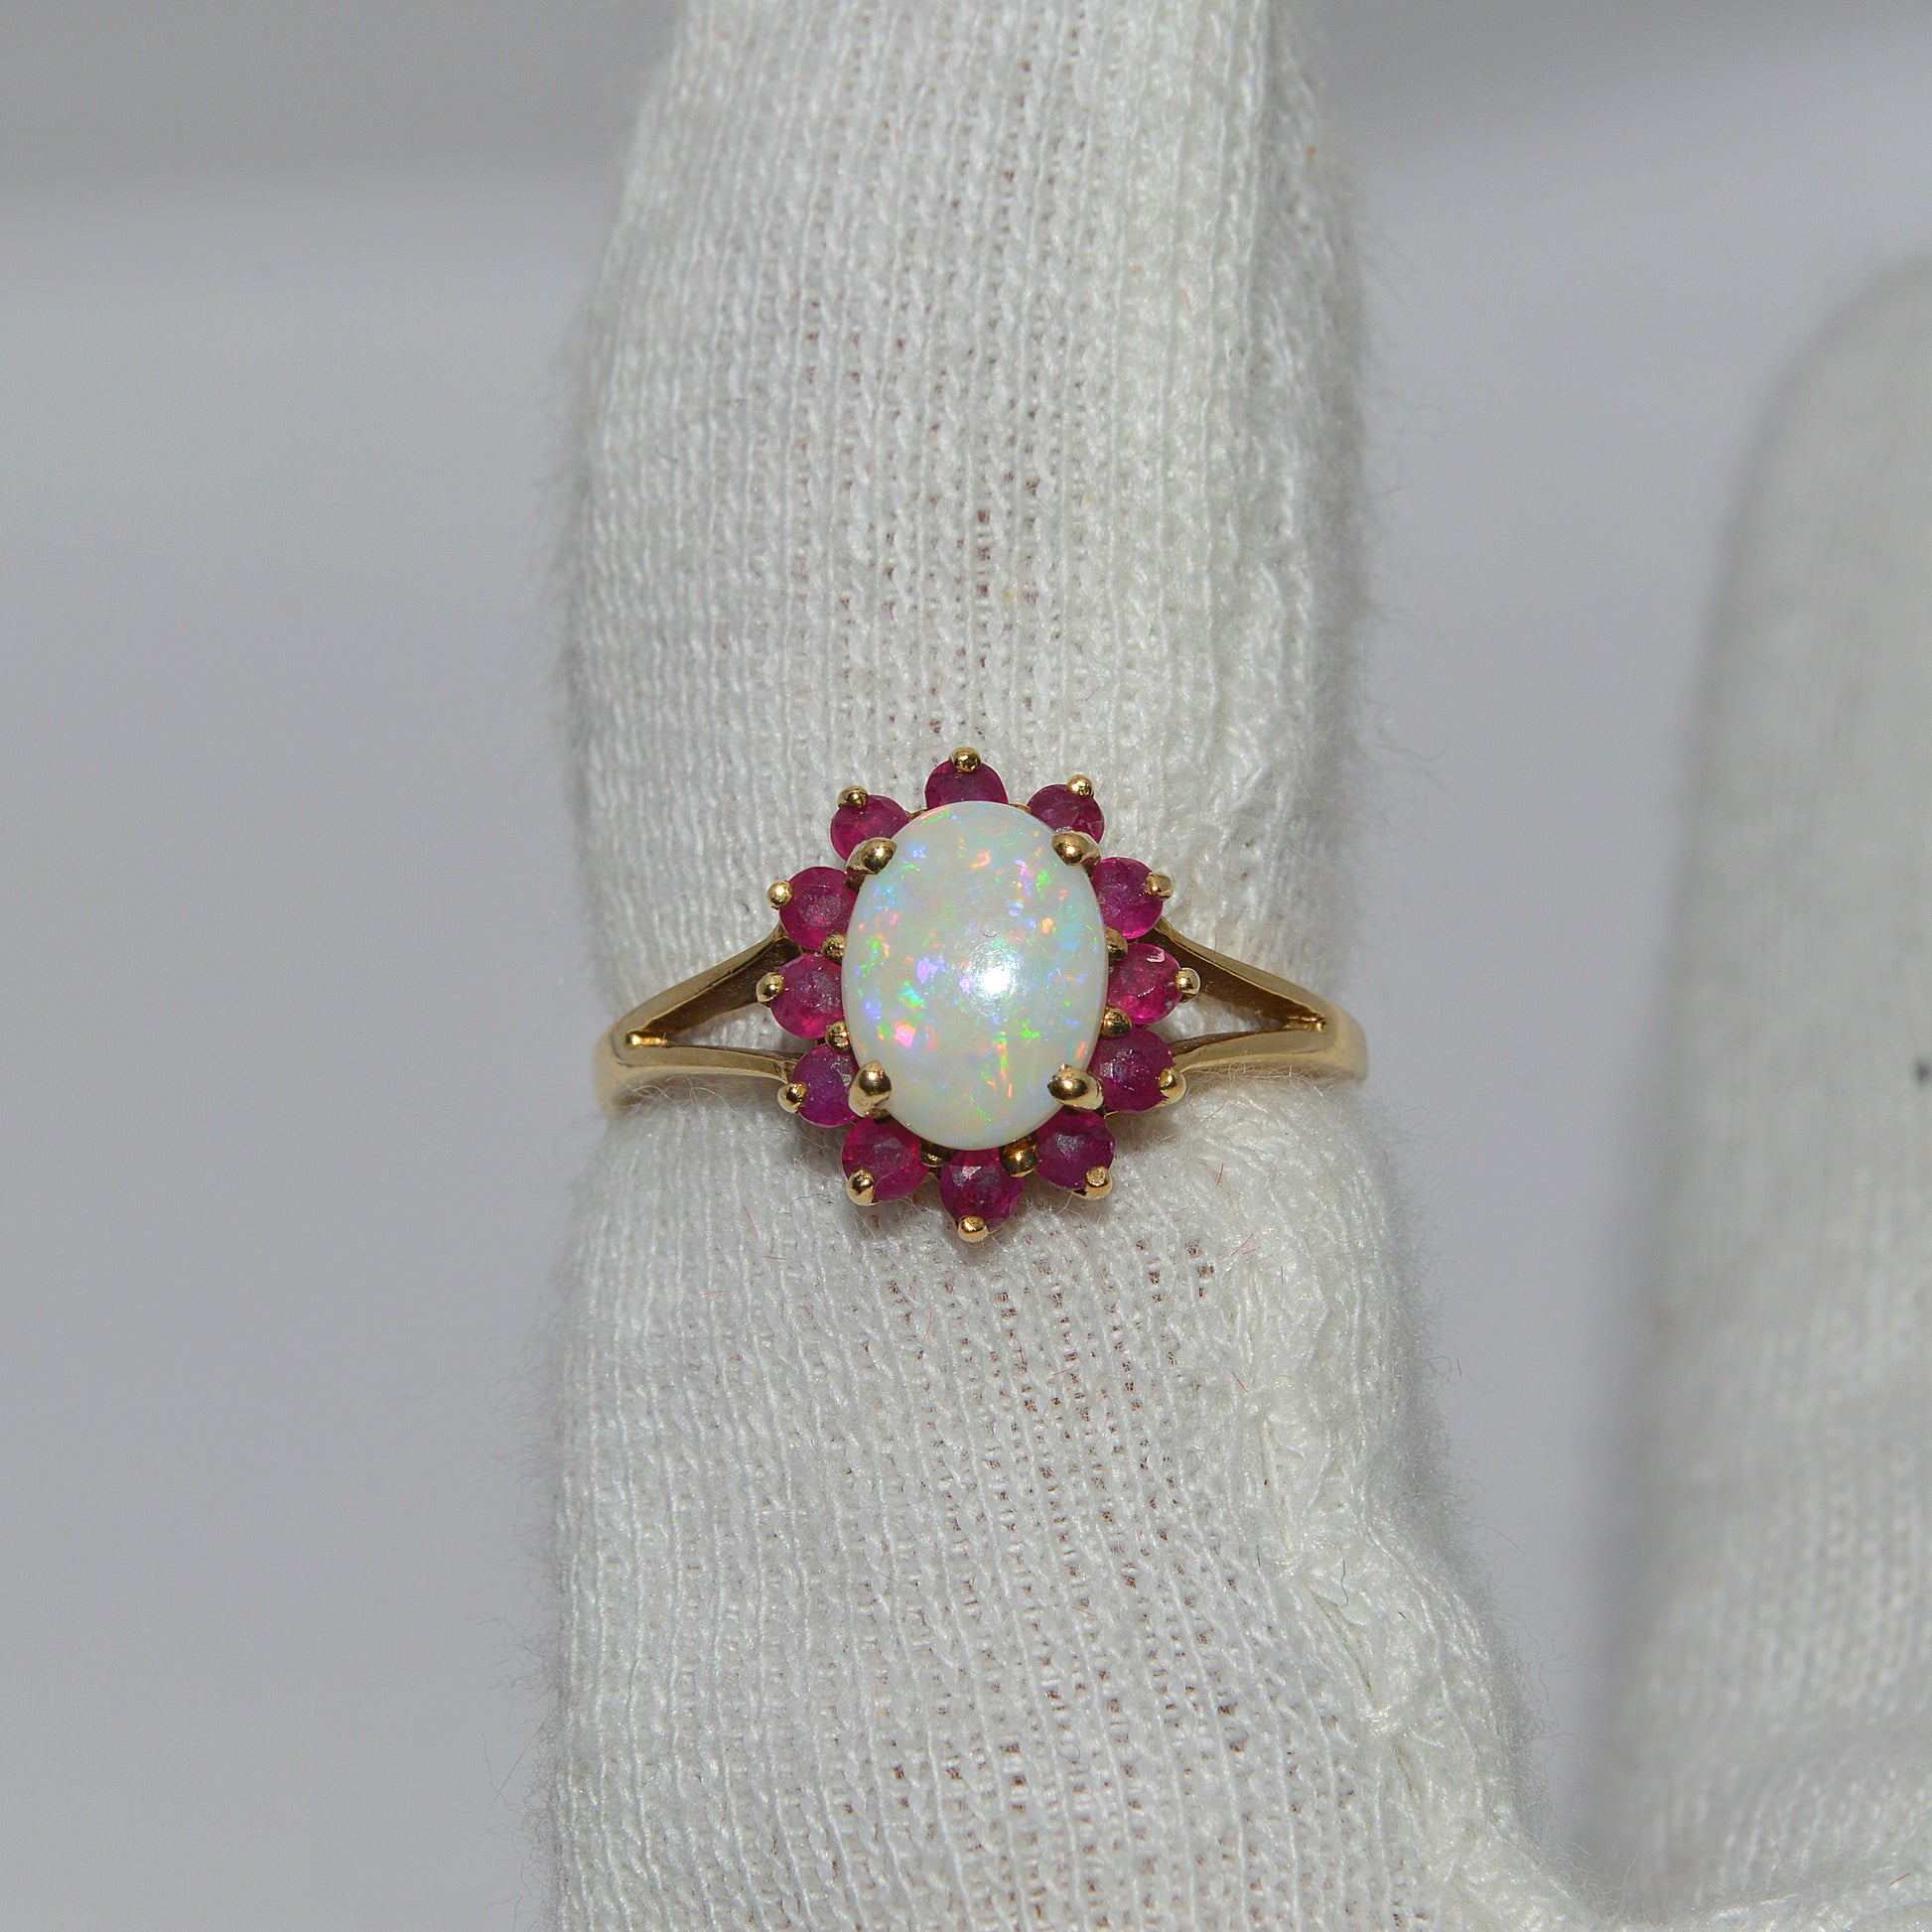 9ct Gold - Opal & Ruby Ring finger top down